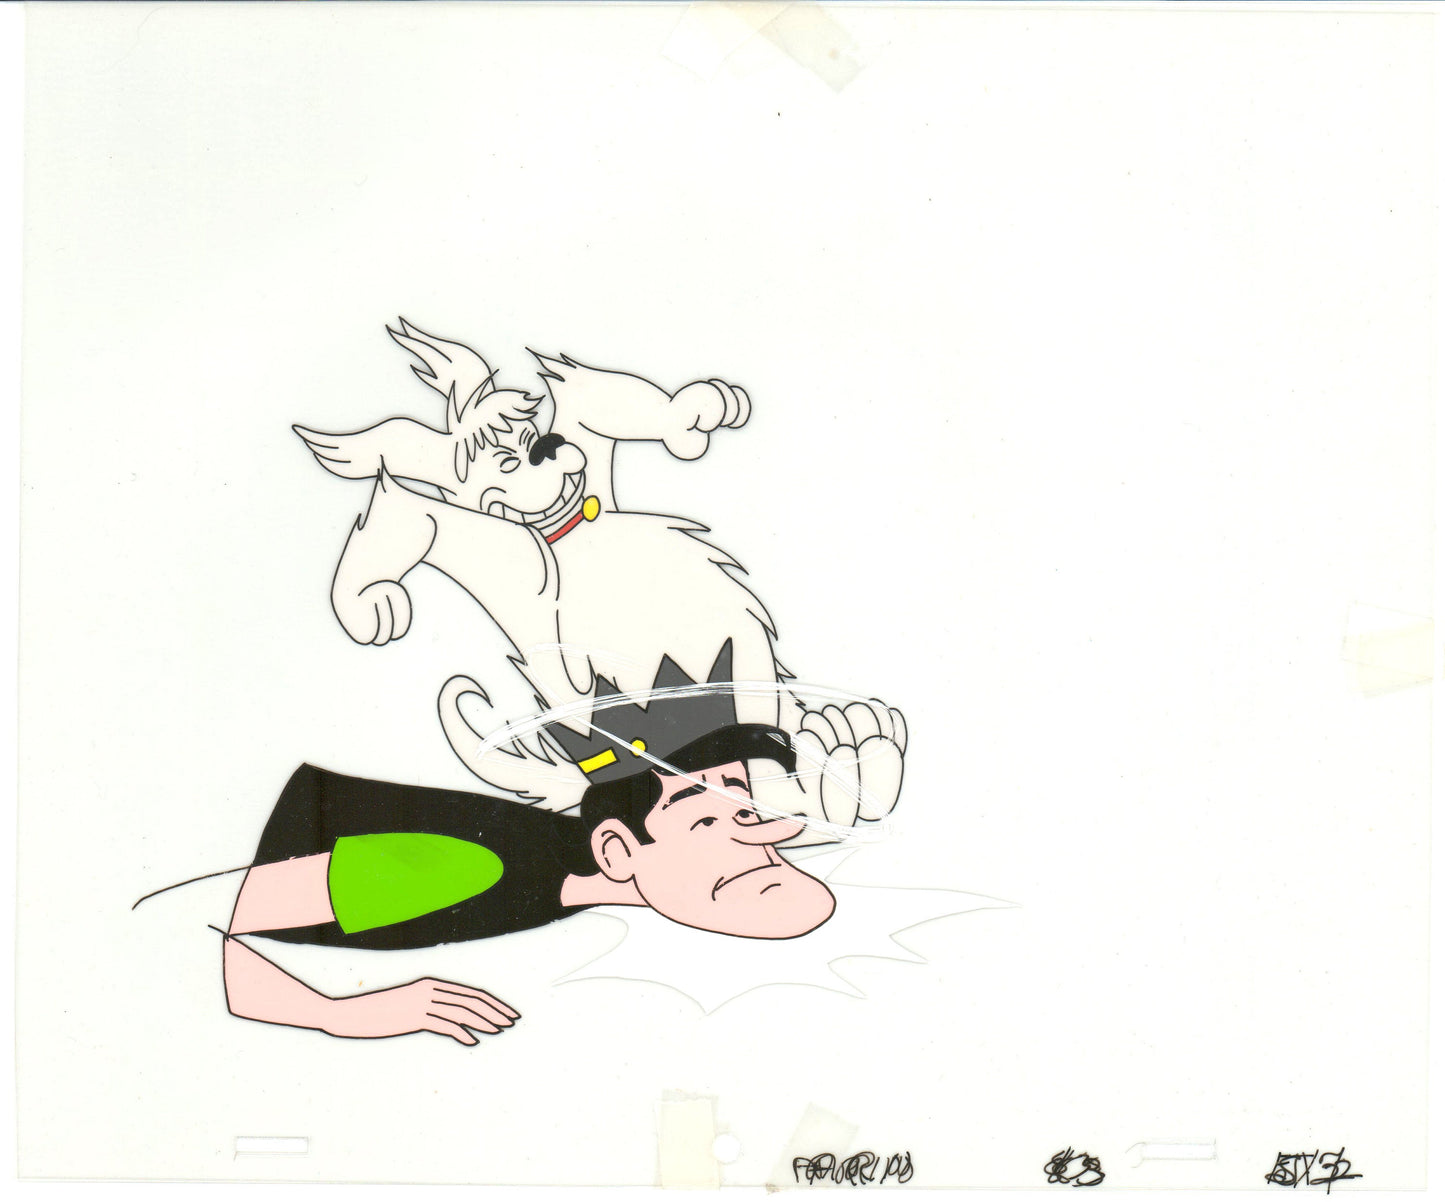 Archie Production Animation Art Cel Setup from Filmation 1968-1969 b2050